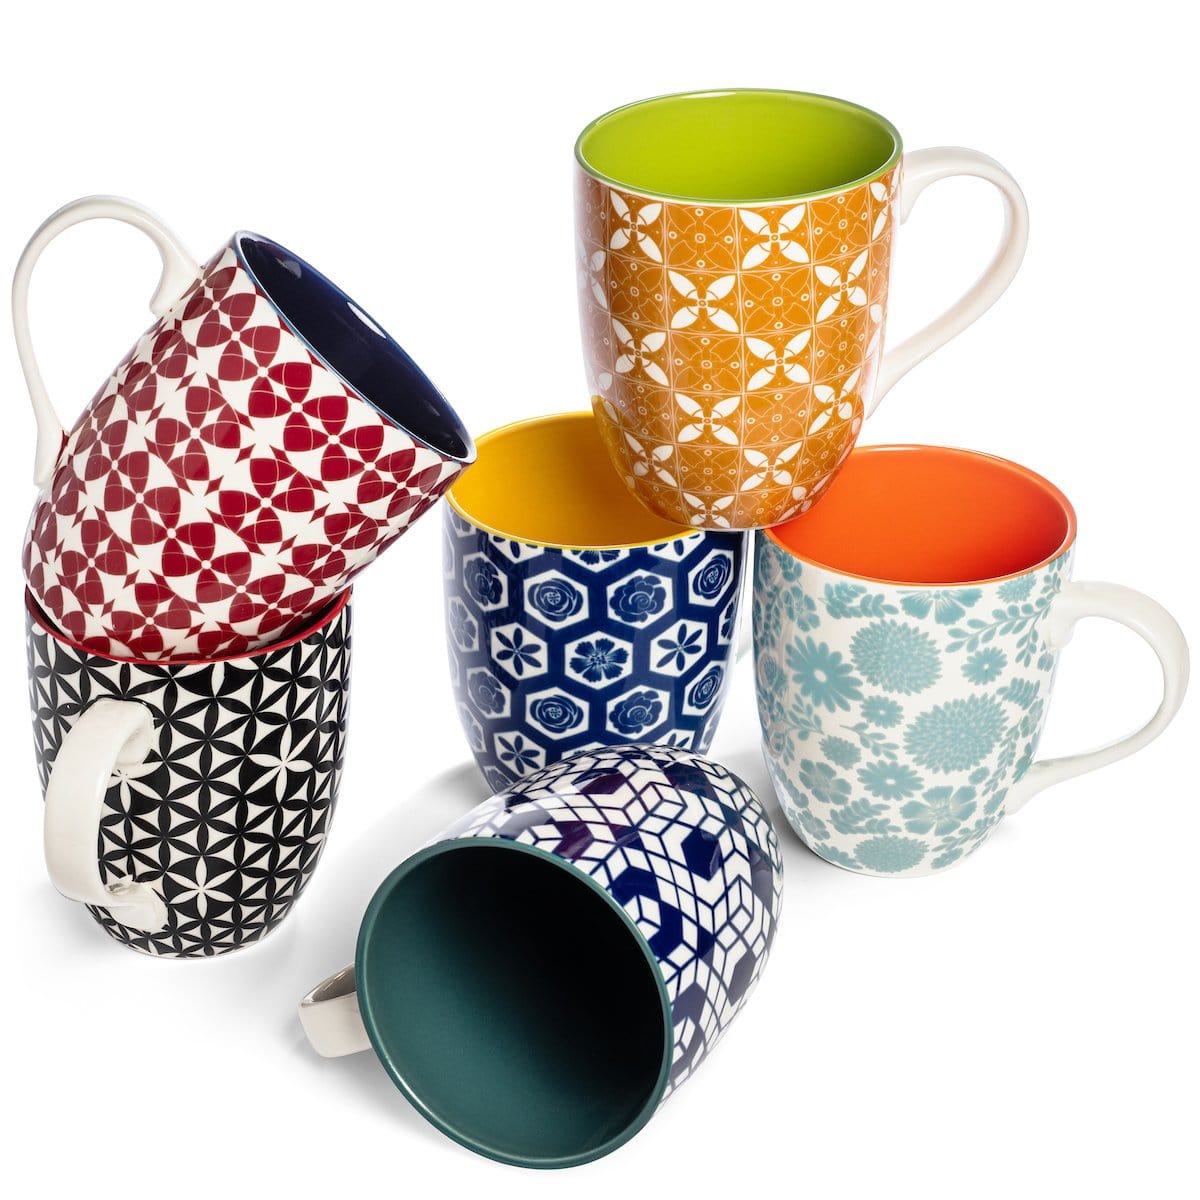 Annovero Coffee Mugs/Cups, set of 6